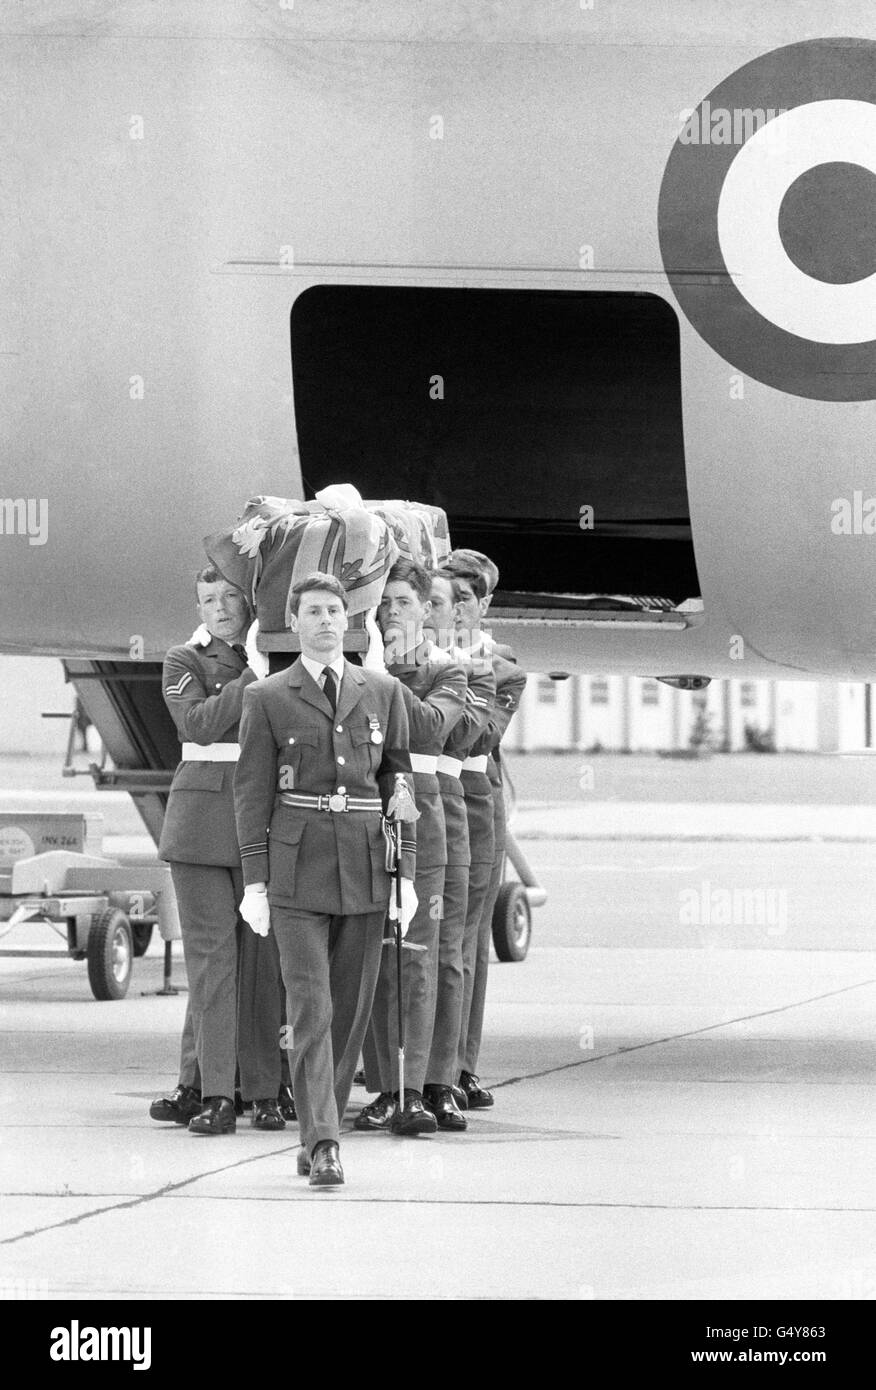 The coffin carrying the Duke of Windsor's body is seen draped with his personal standard as it is borne from the VC 10. It was taken to the Church of the Ascension, Benson, where it will stay for one night. Stock Photo